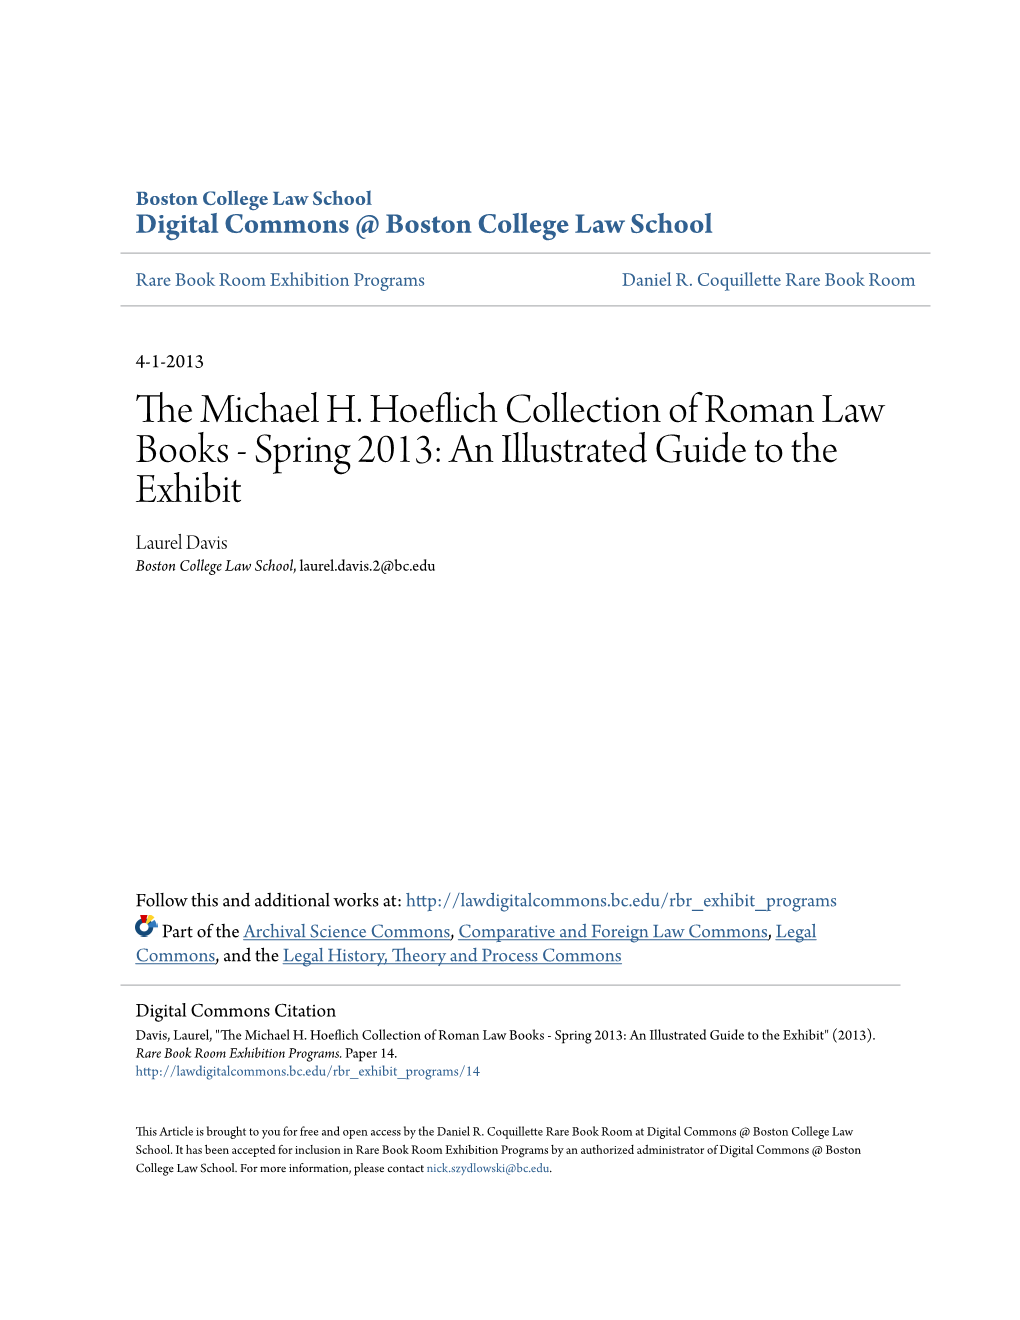 The Michael H. Hoeflich Collection of Roman Law Books